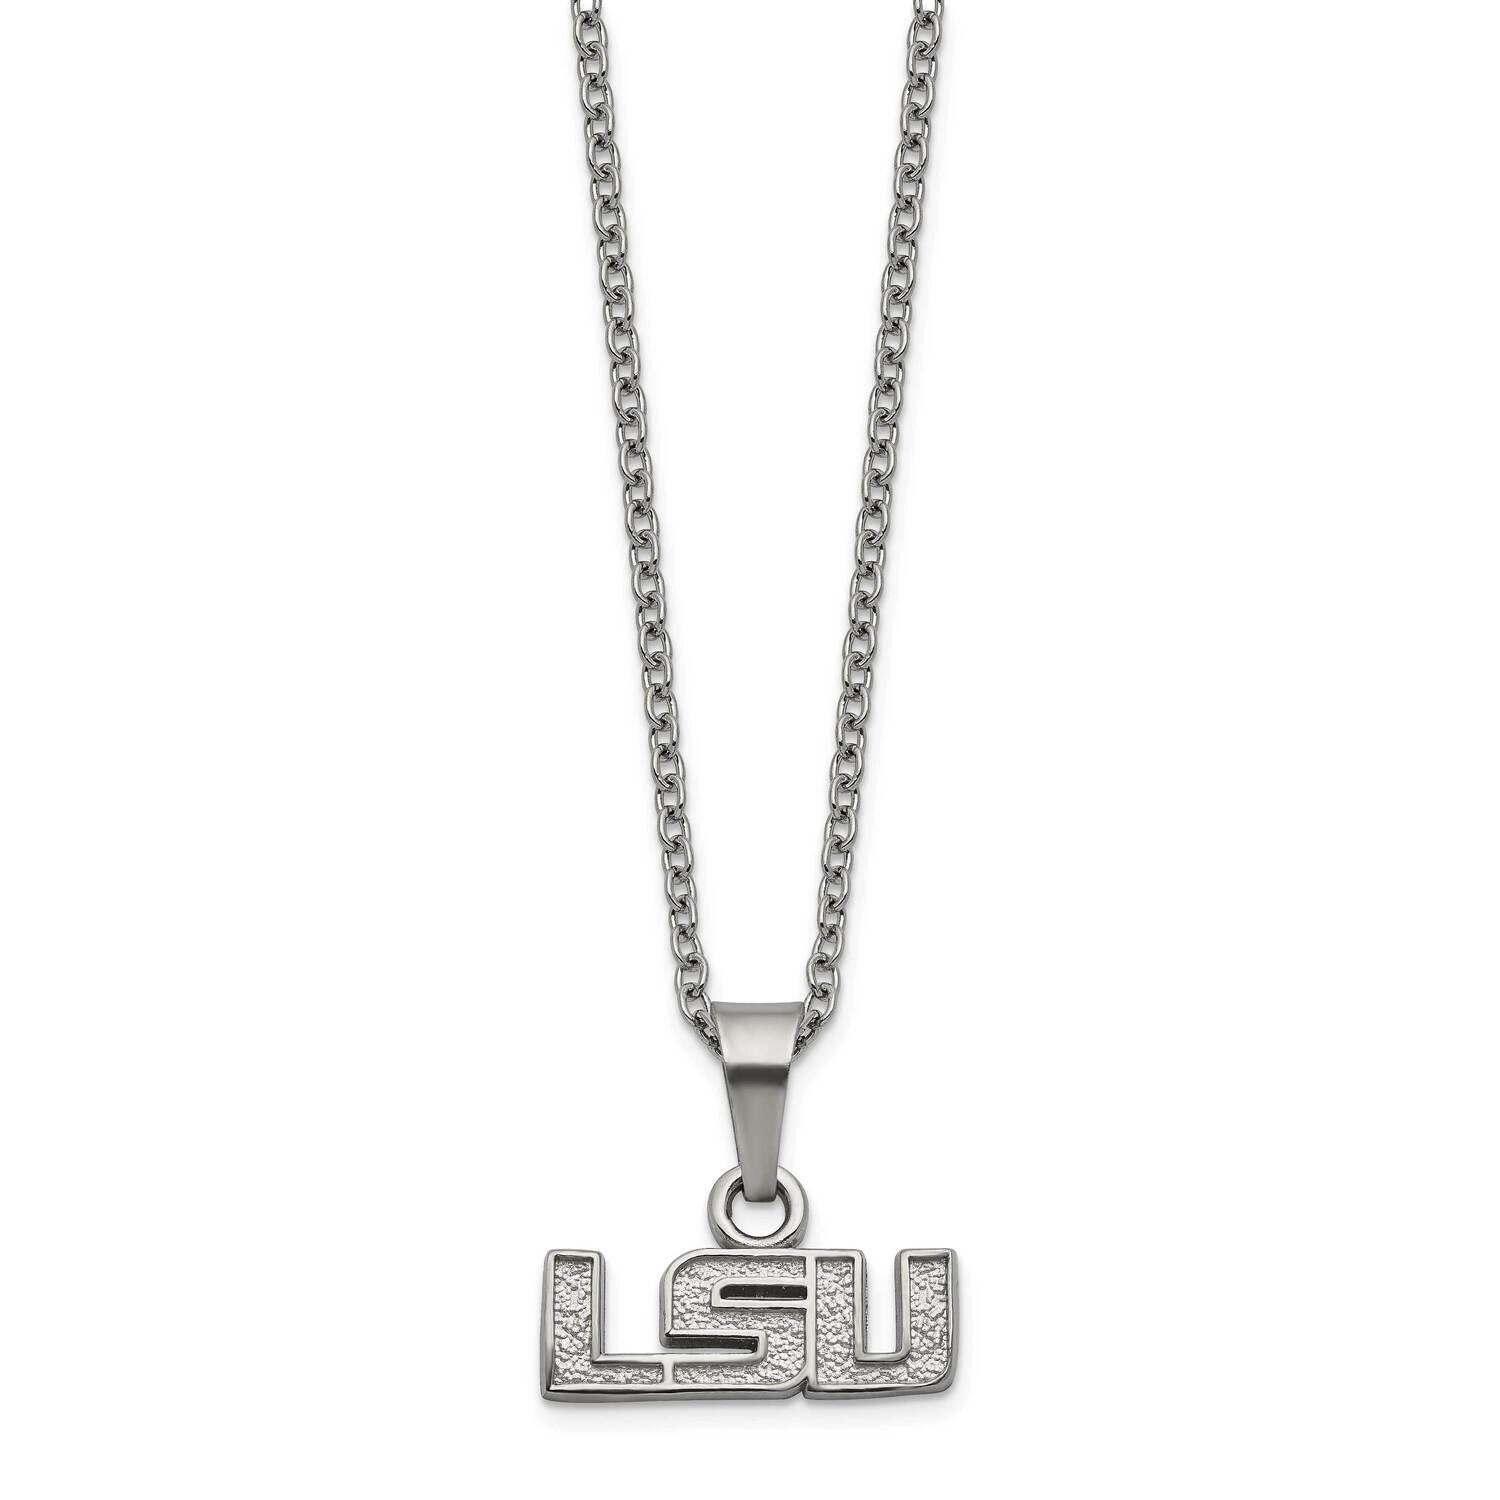 Lsu Pendant & Chain with 2 inch Extender Necklace Stainless Steel ST516LSU